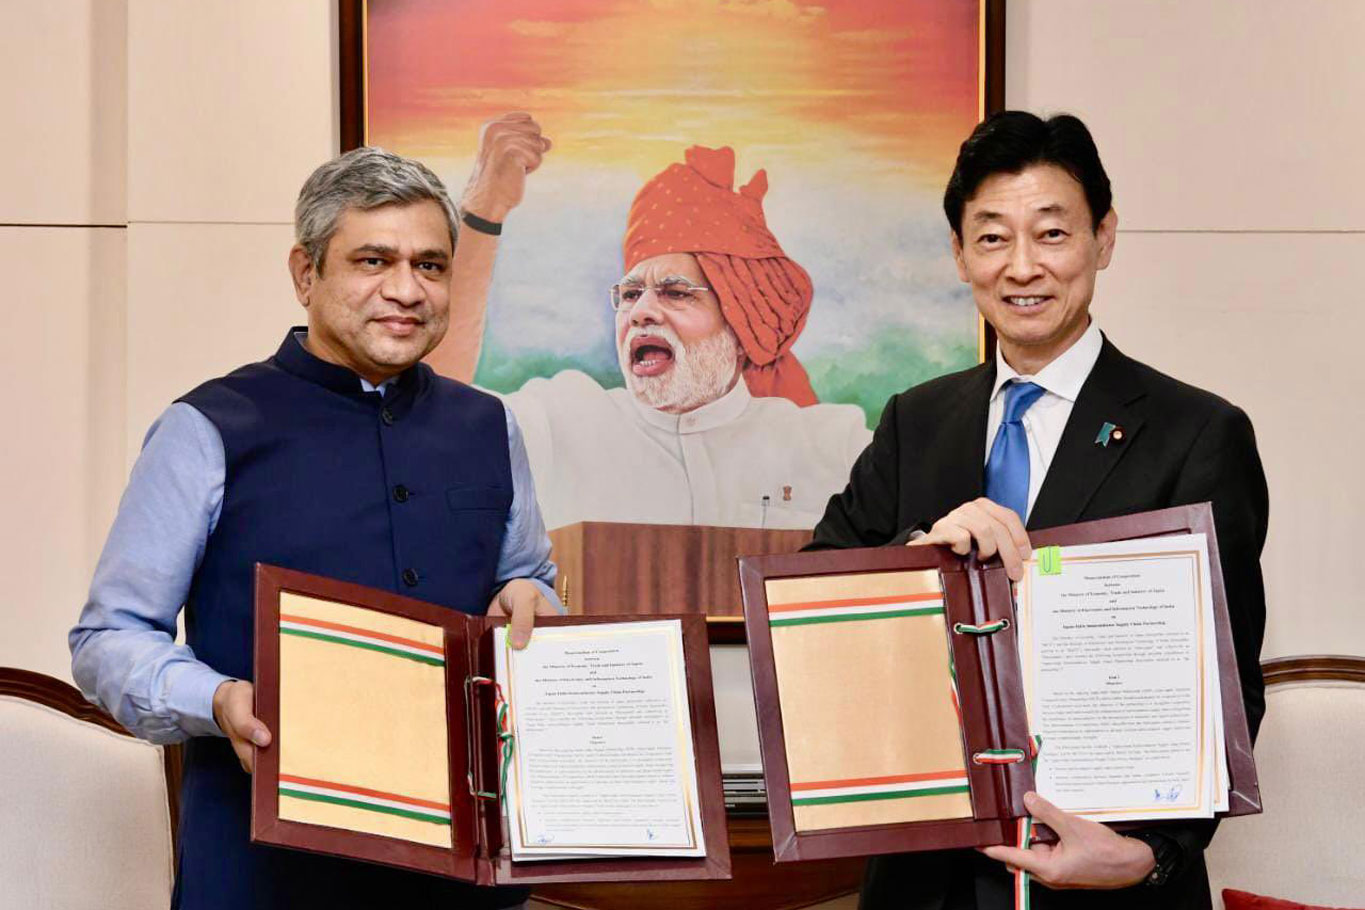 Japan, like its Quad partner, the US, signs semiconductor agreement with India.